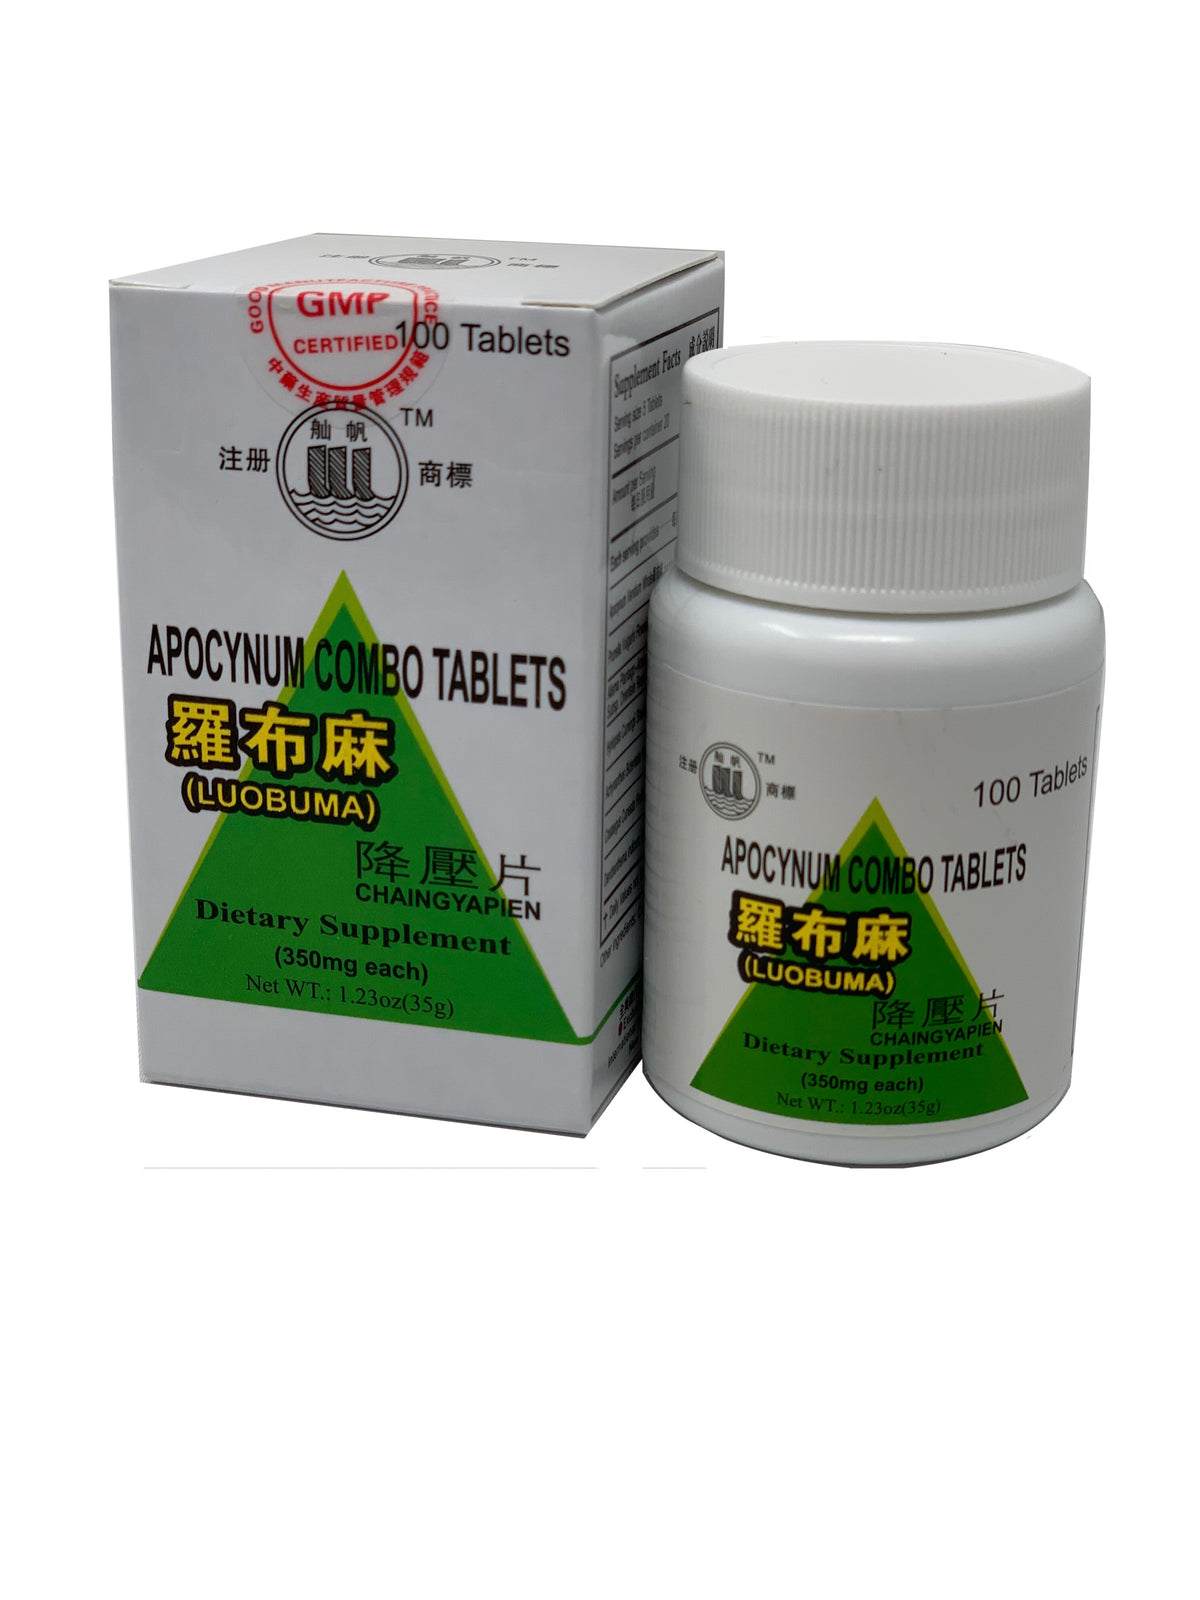 Apocynum Combo Tablets (Luo Bu Ma)